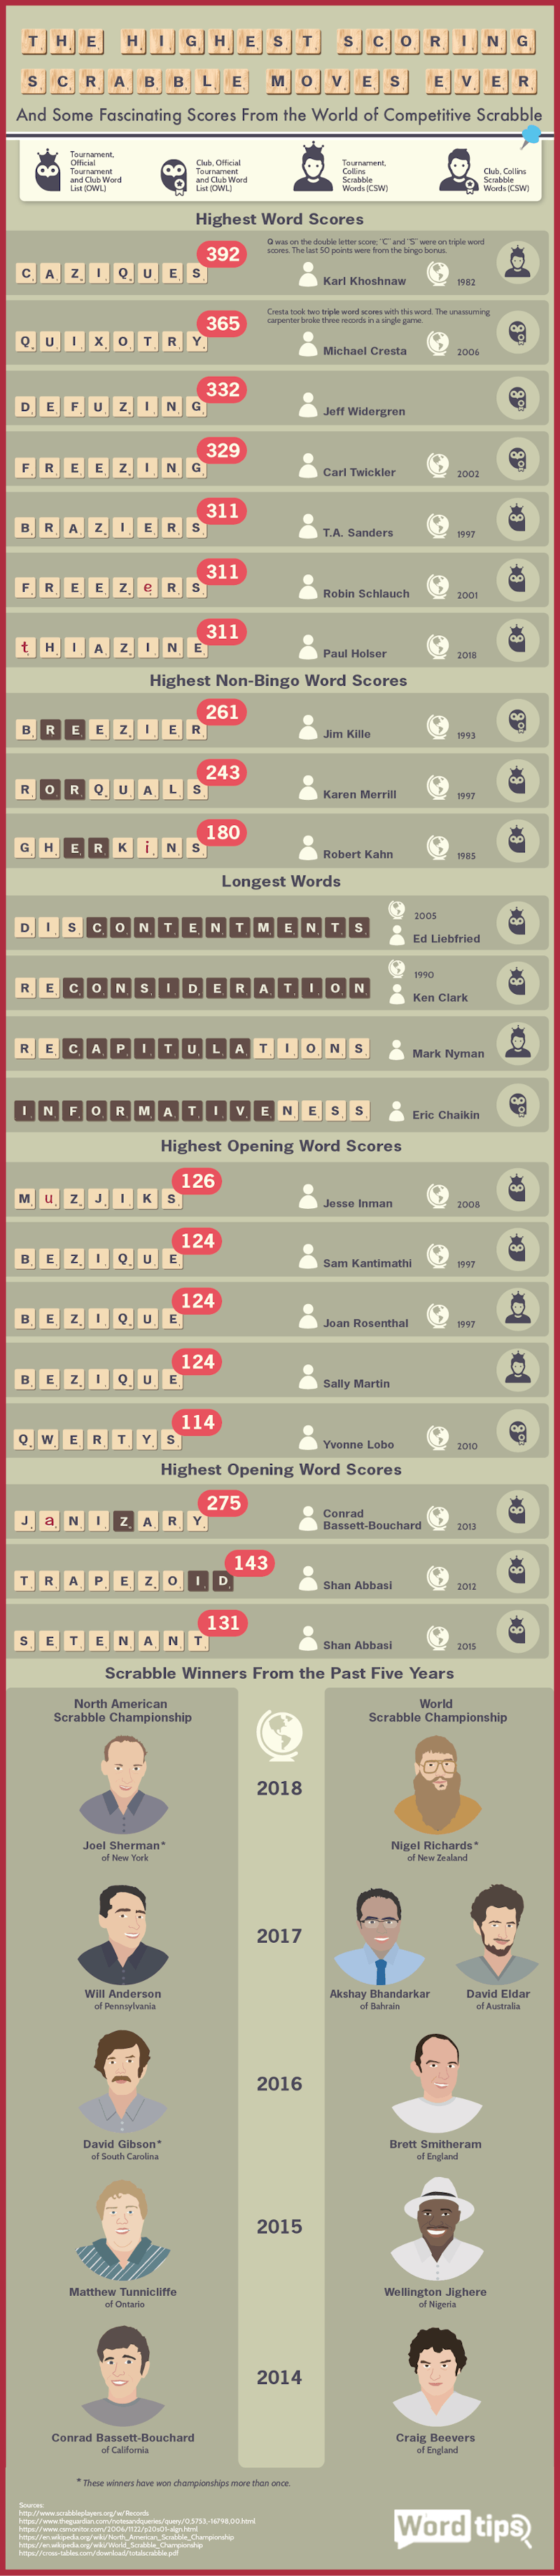 The Highest-Scoring Scrabble Moves Ever - Word.Tips - Infographic